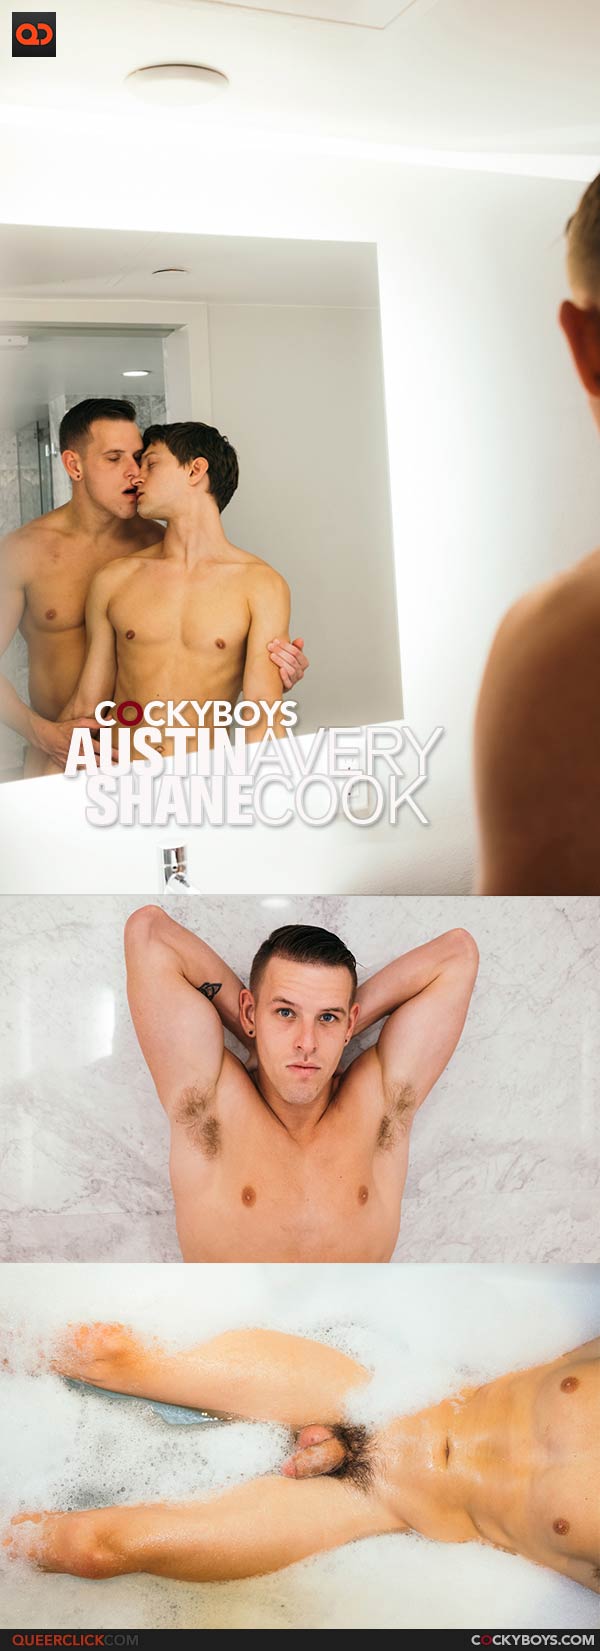 Leaked Shane Cook OnlyFans OnlyFans Shanecookxxx